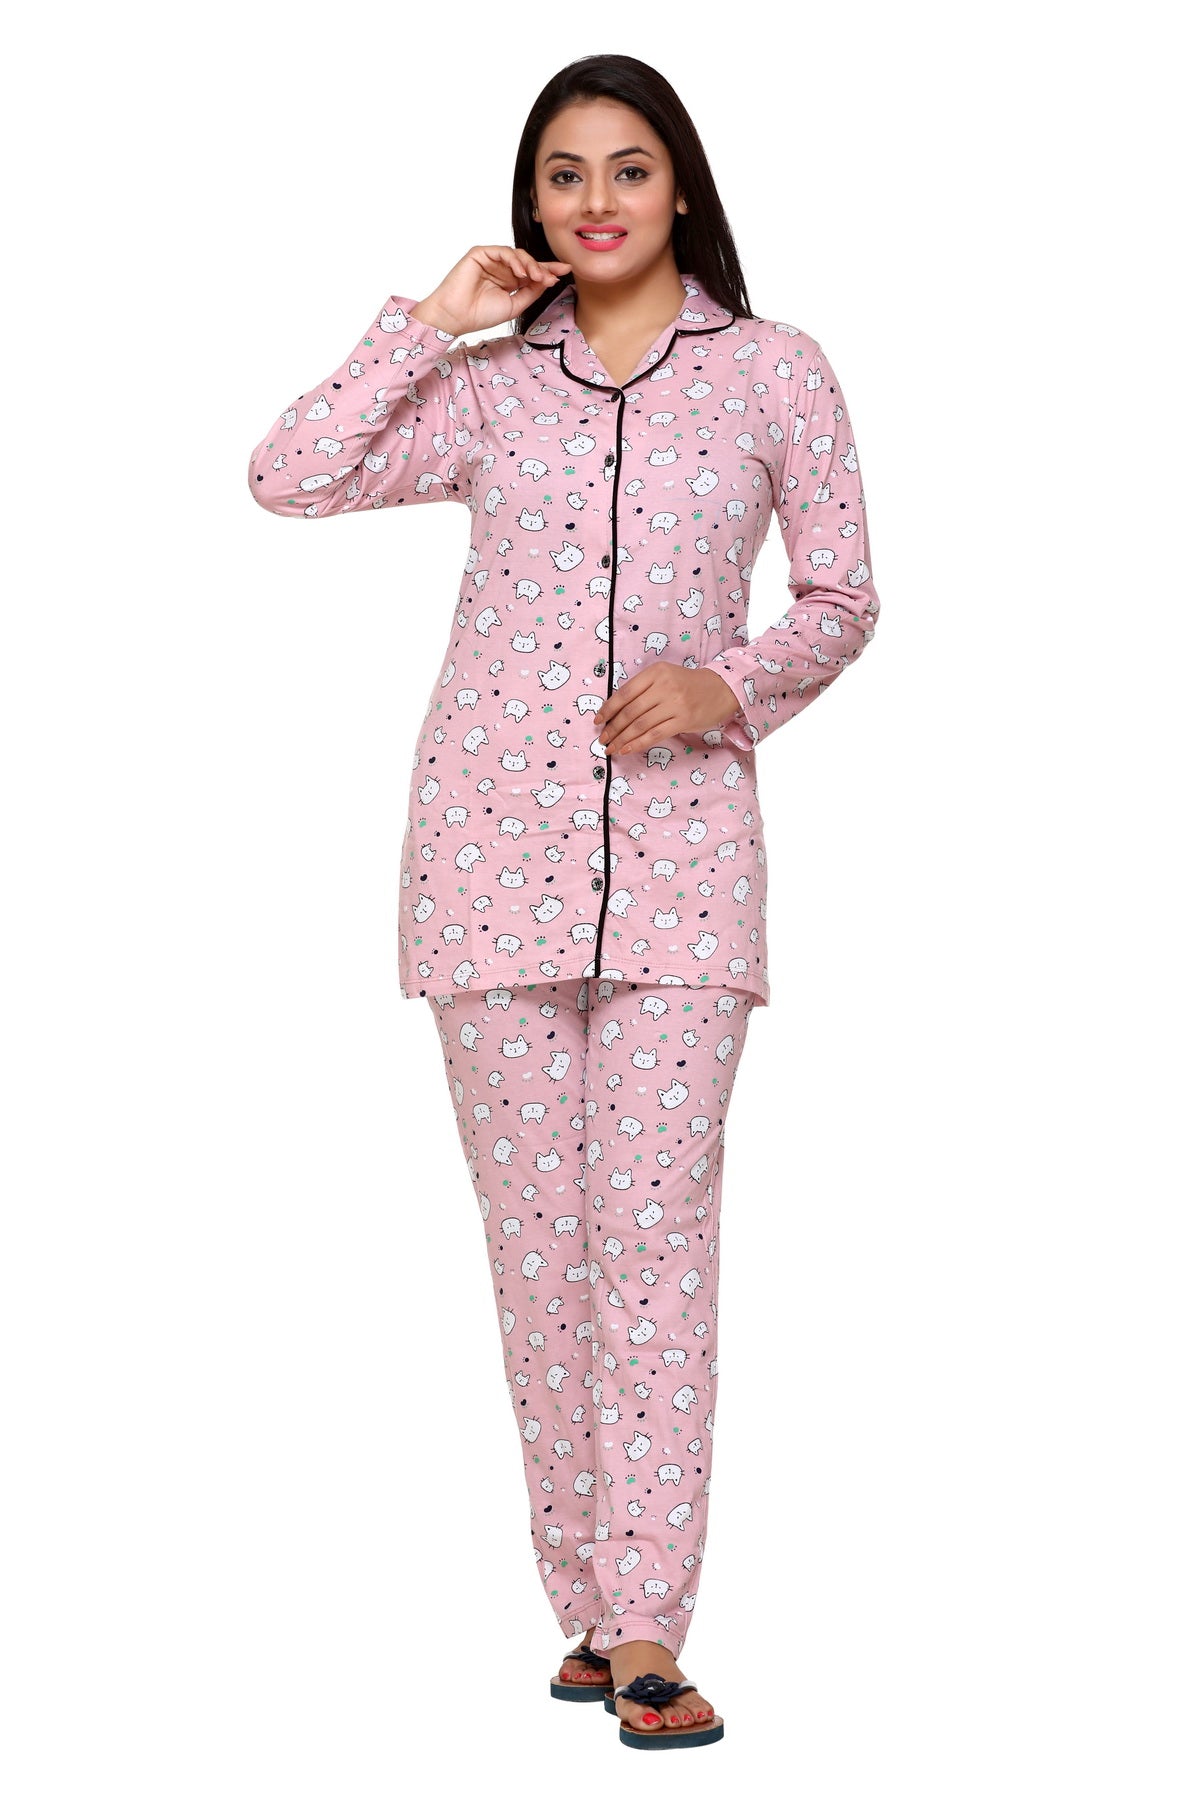 CUPID Full Sleeves Cotton Printed Night Suit Set ( Pink) freeshipping - Cupid Clothings